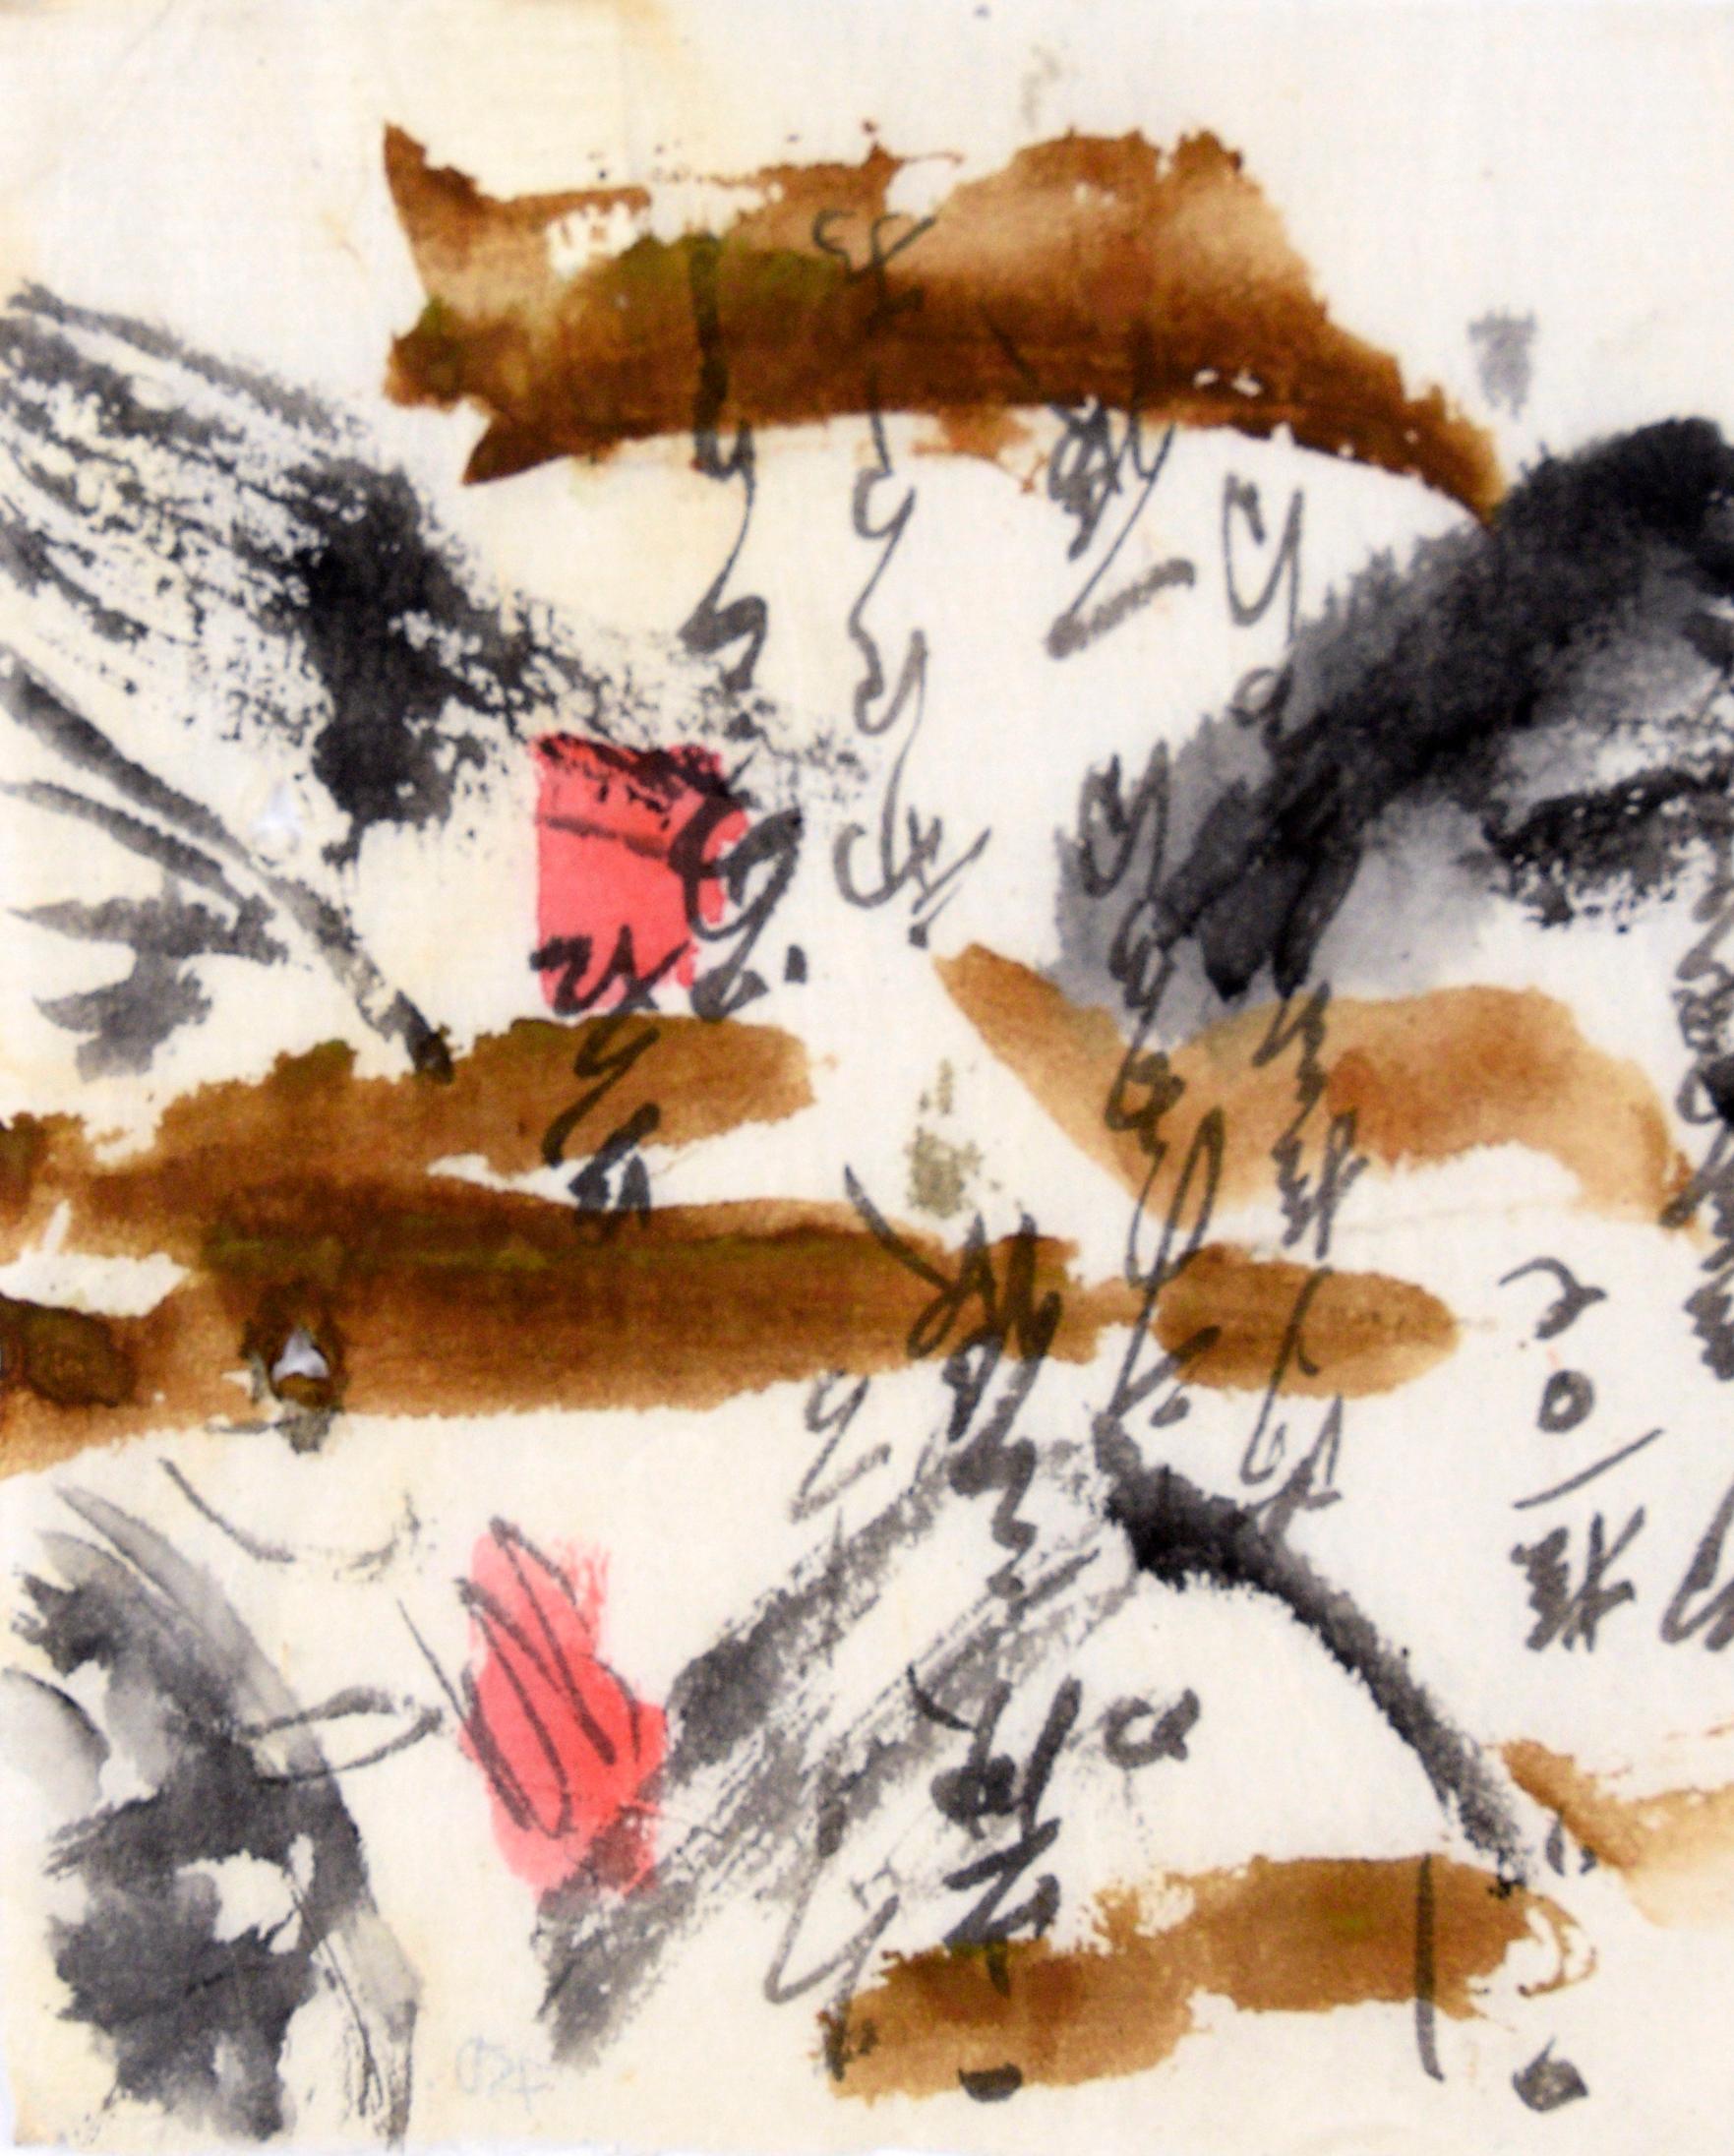 Calligraphy Abstract Panorama I - Japanese Calligraphy on Rice Paper
Landscape and Calligraphy on rice paper by Michael Pauker (American, 20th c).
Signed by the artist in the bottom right corner in red pencil, 